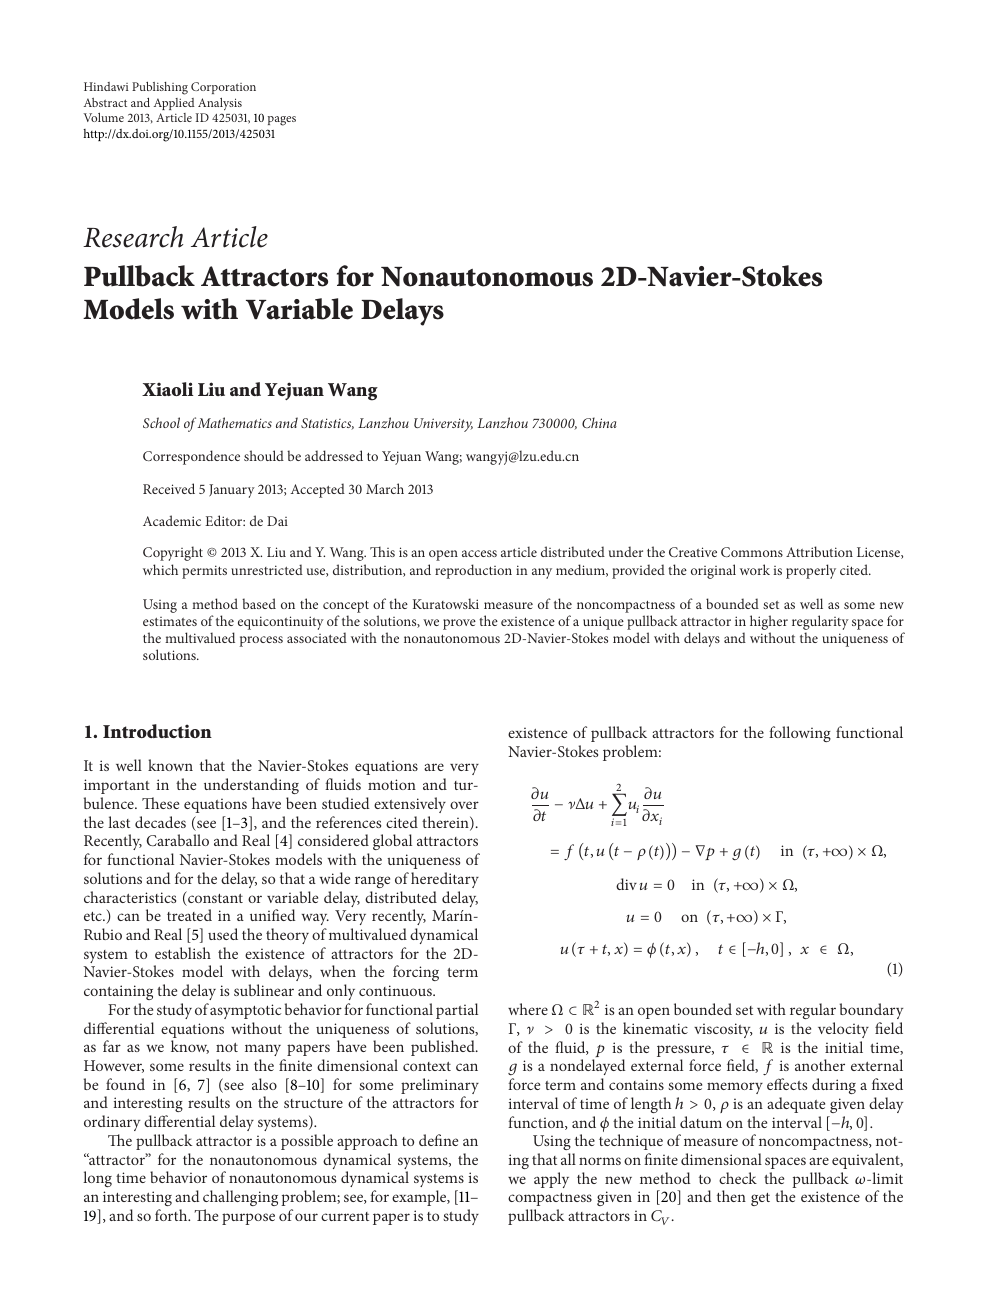 Pullback Attractors For Nonautonomous 2d Navier Stokes Models With Variable Delays Topic Of Research Paper In Mathematics Download Scholarly Article Pdf And Read For Free On Cyberleninka Open Science Hub